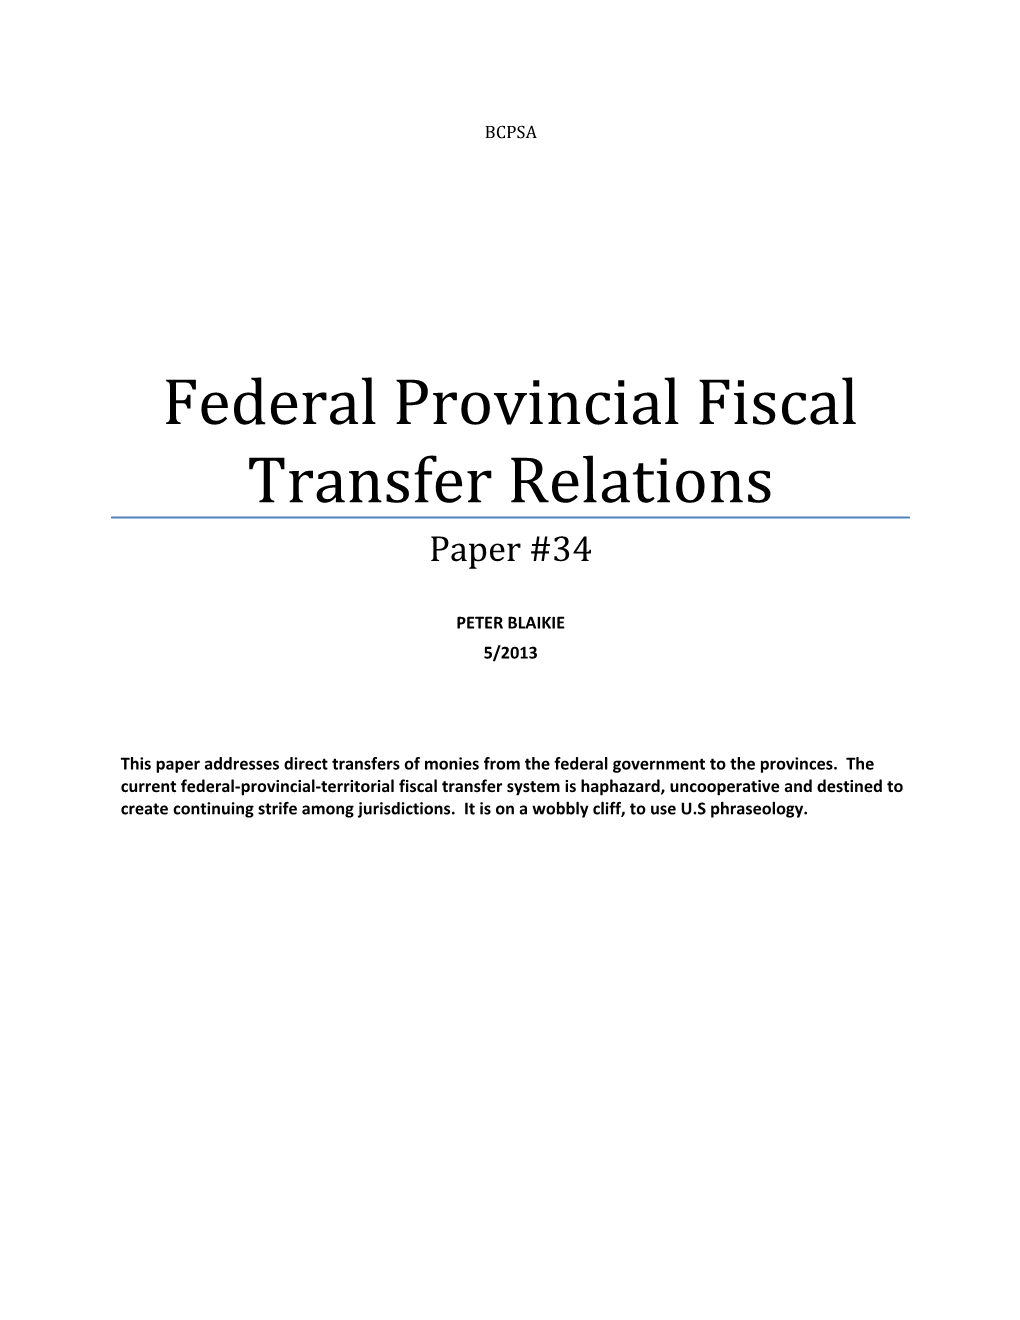 Federal Provincial Fiscal Transfer Relations